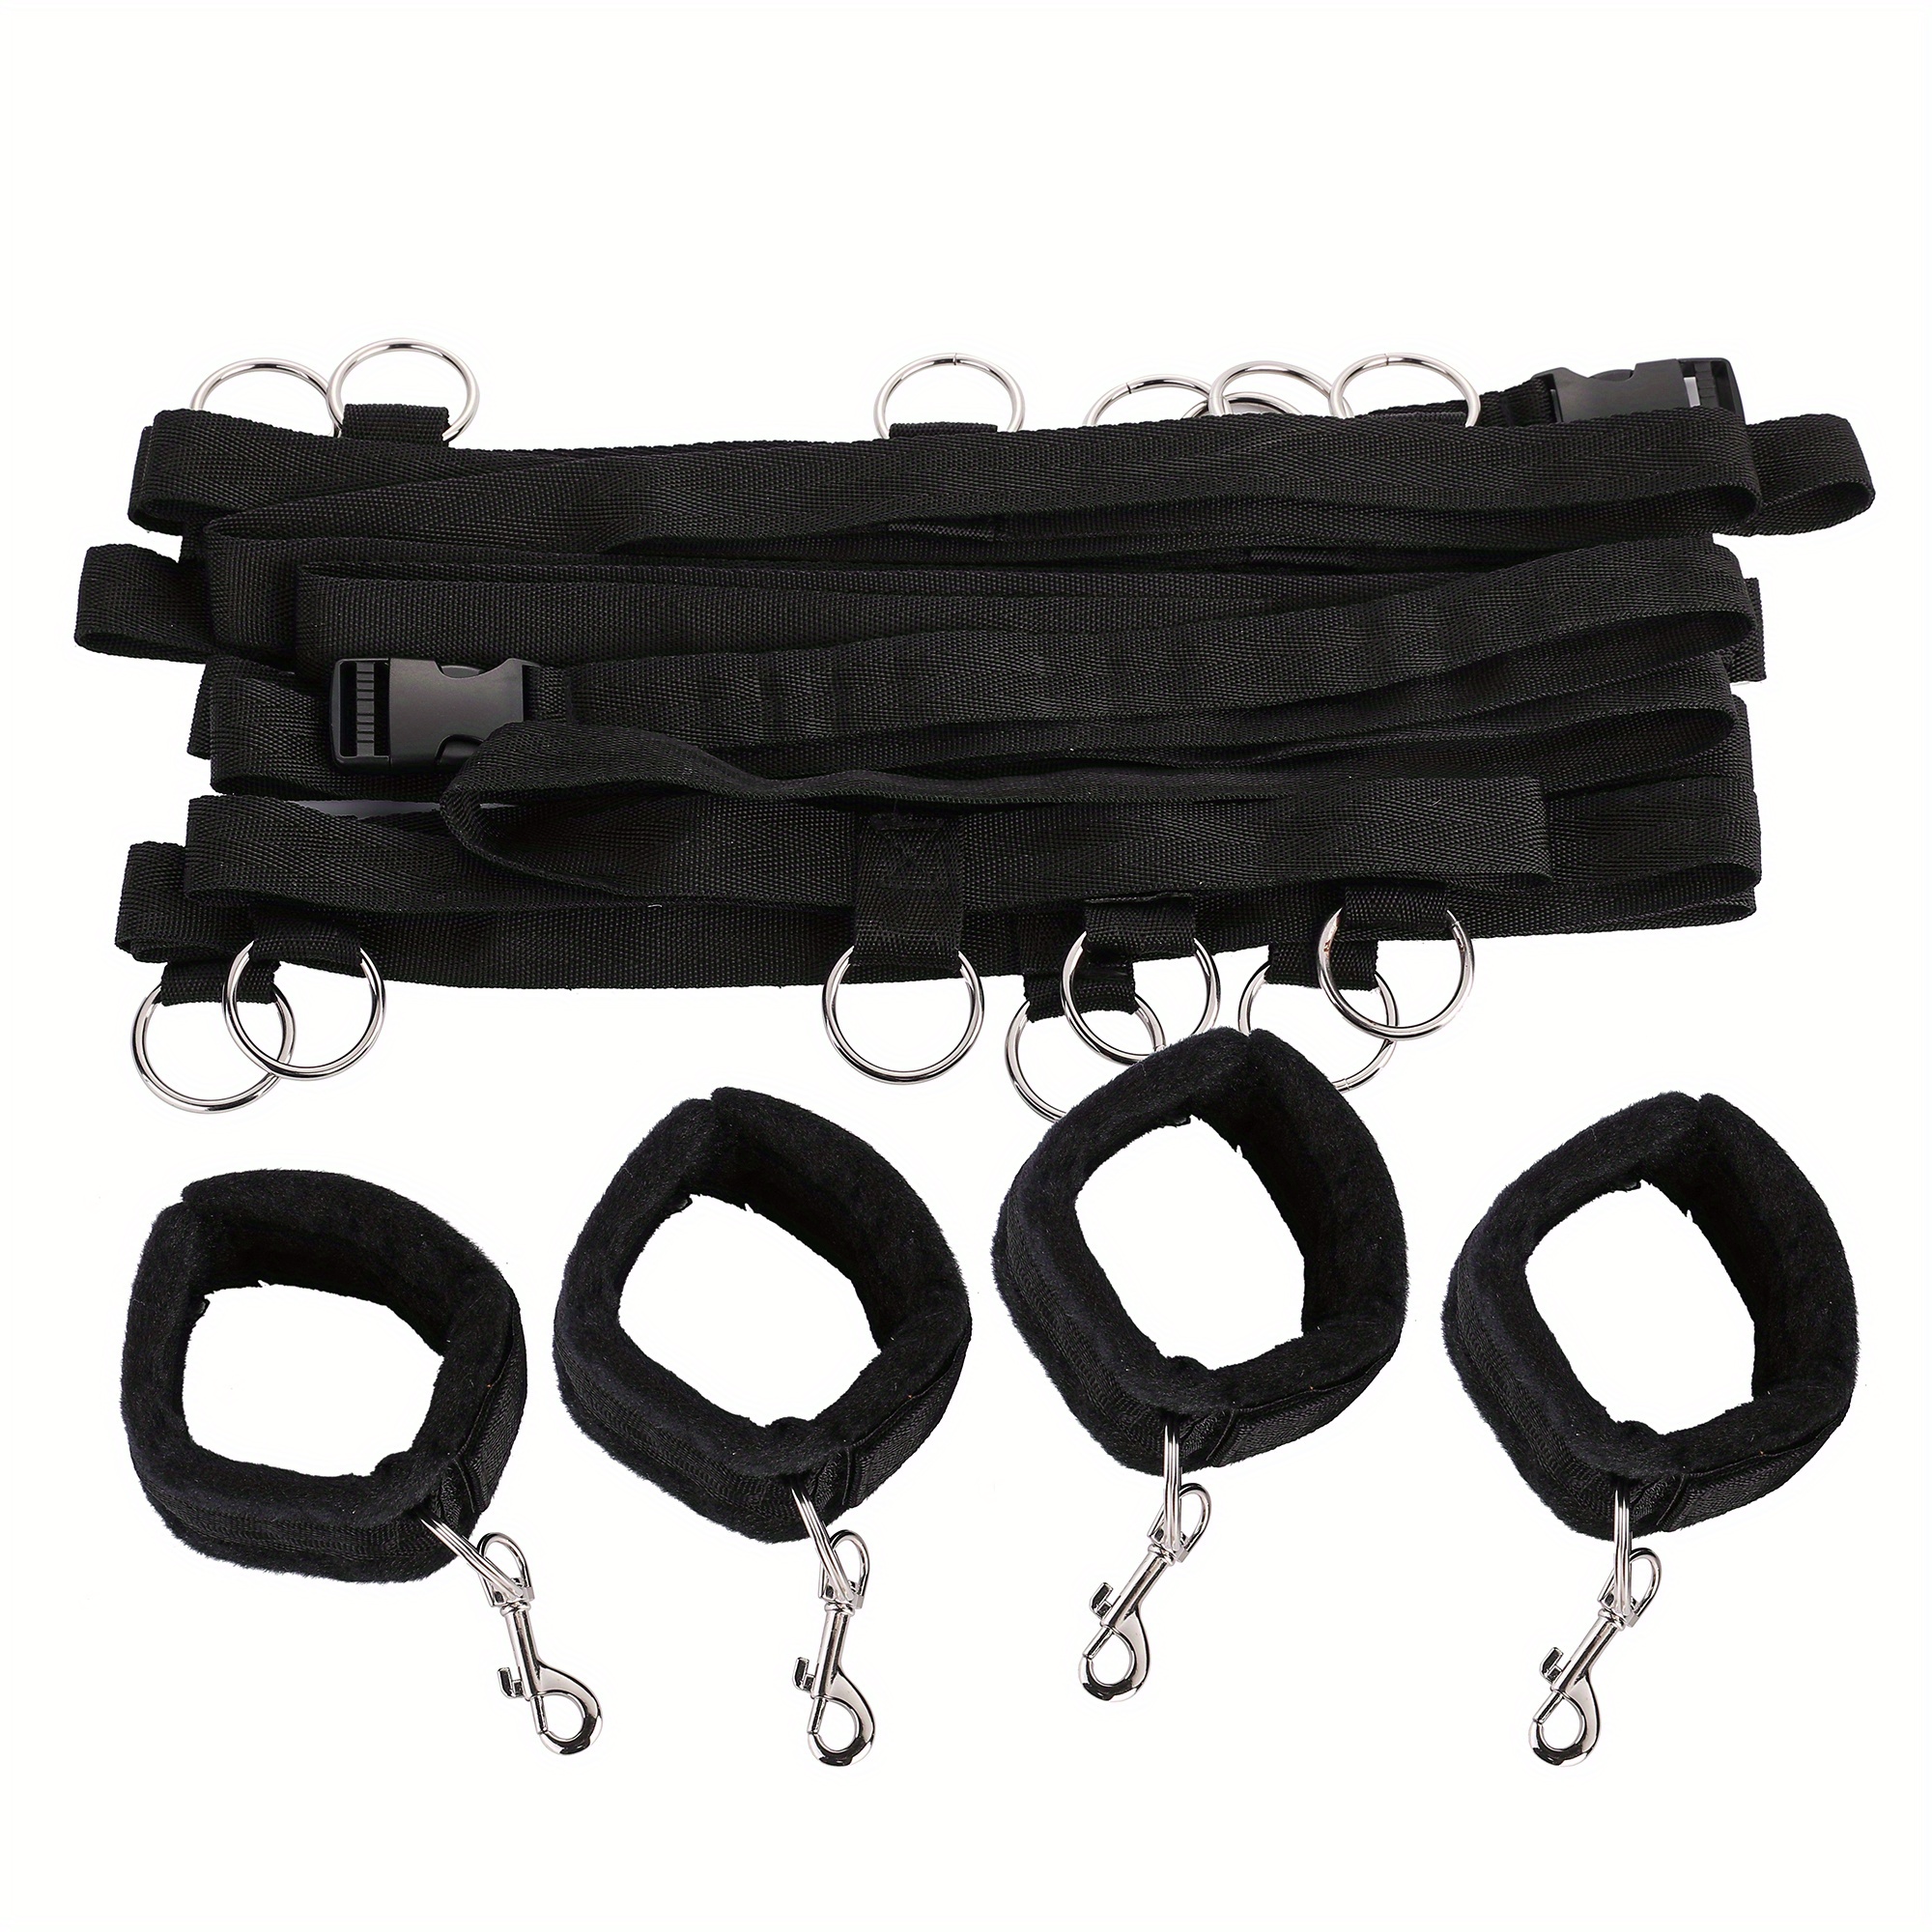 Bed Bondage Set Ankle Cuffs Restraint Rope Kit Handcuffs System